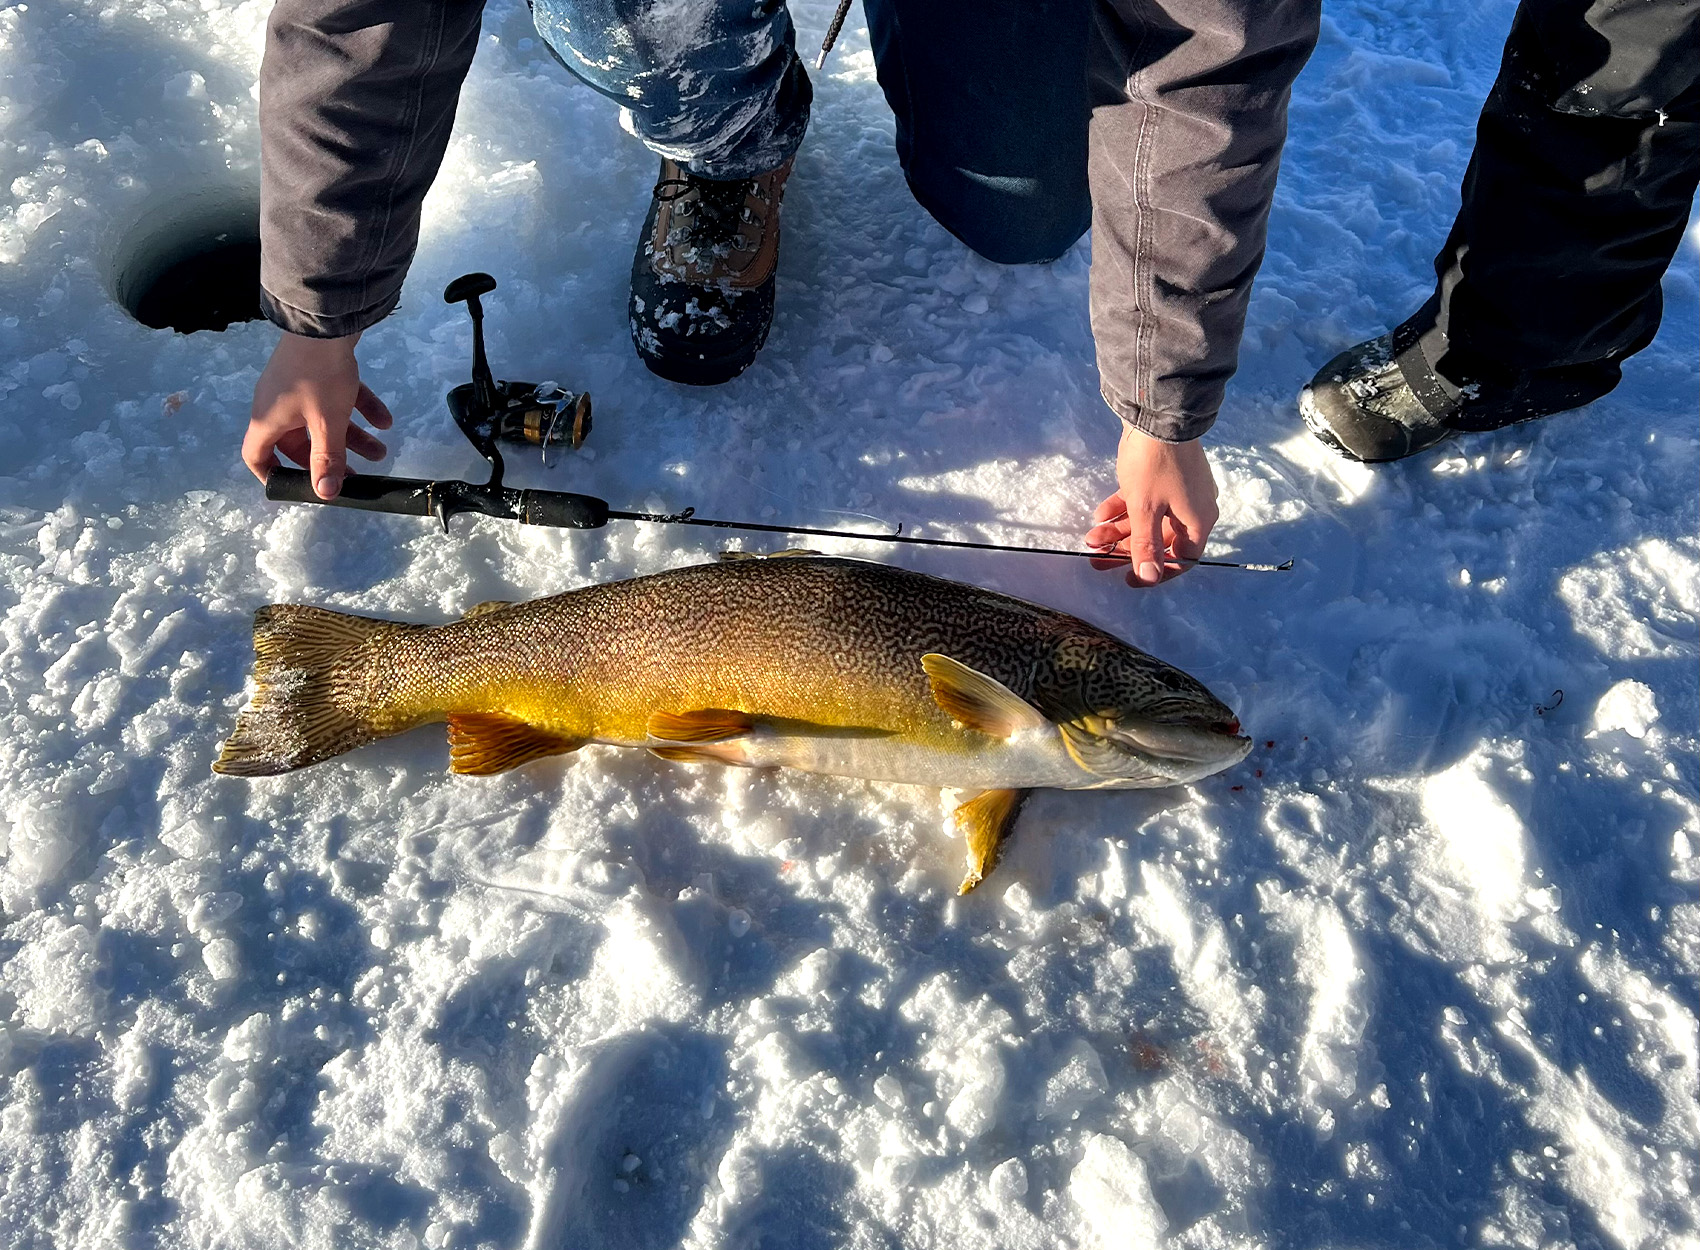 A big tiger trout caught through the ice in Utah.